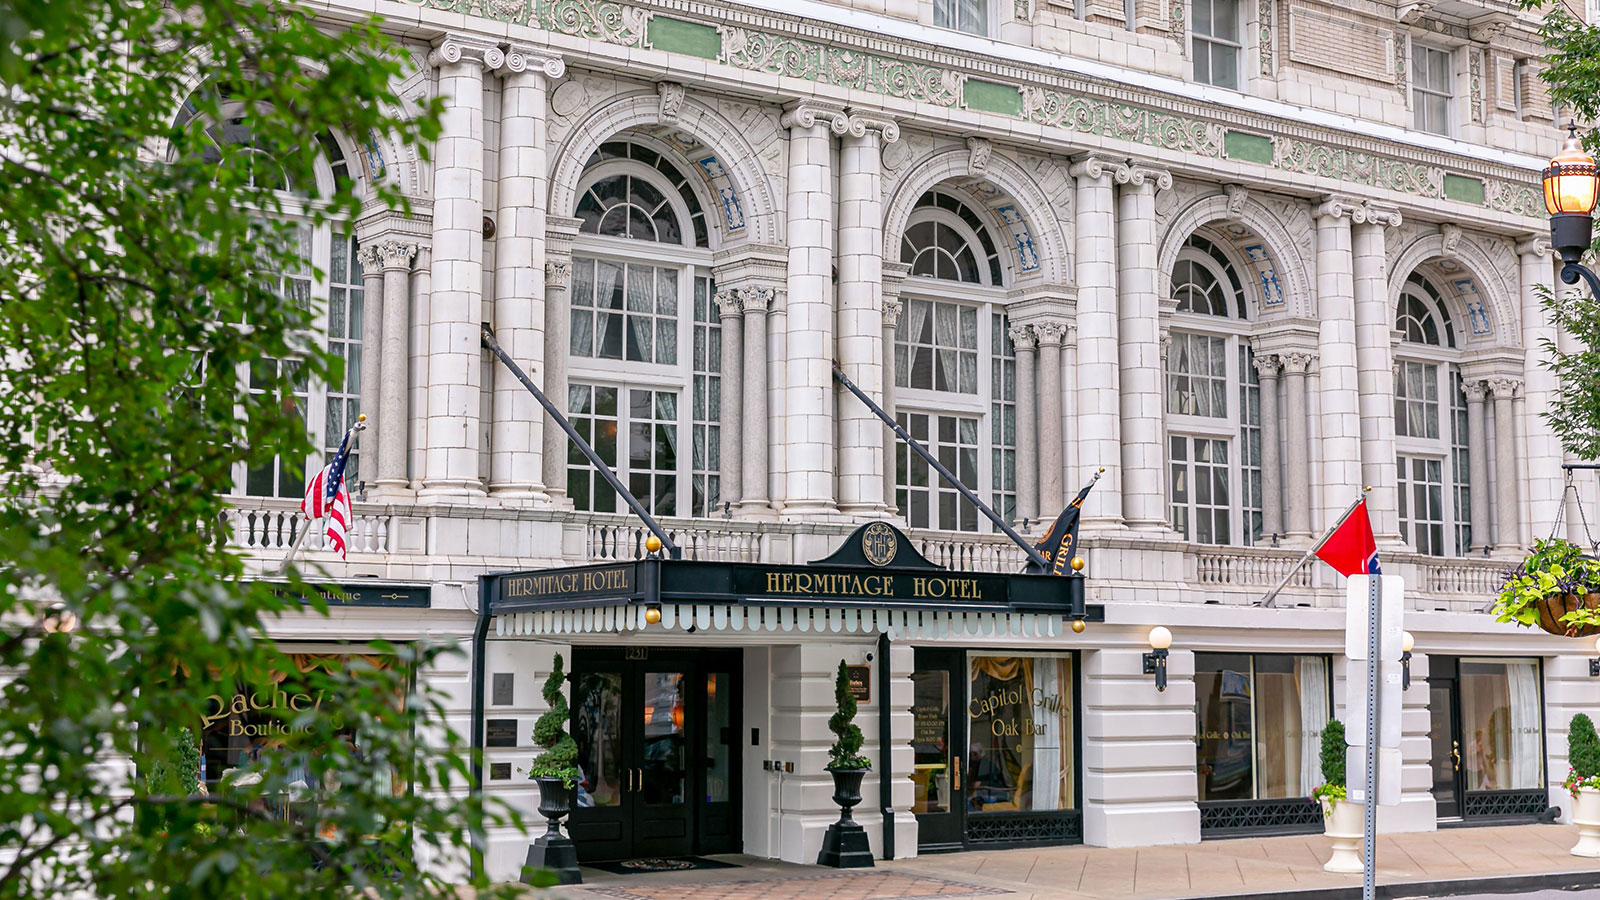 Image of Exterior The Hermitage Hotel, 1910, Member of Historic Hotels of America, in Nashville, Tennessee, Experience